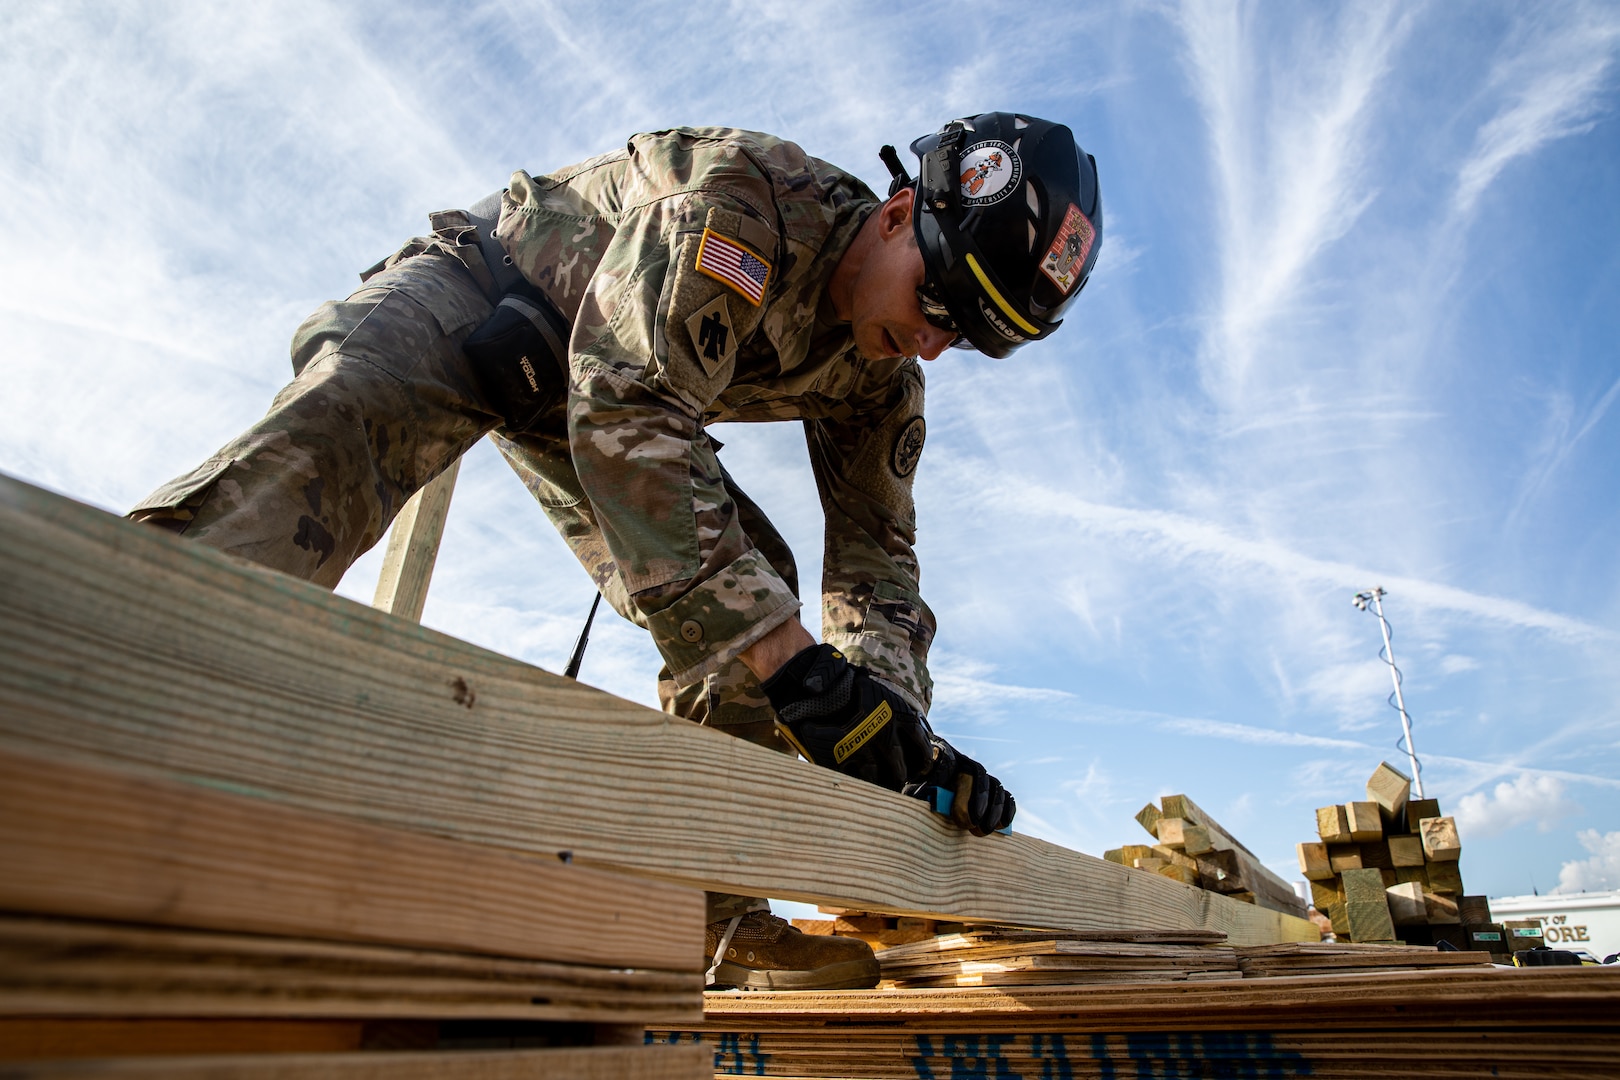 A member of the Oklahoma National Guard’s 63rd Civil Support Team, Sgt. 1st Class Ronald Poland, constructs a solid sole raker that would hold a wall in place when damaged, during a collapsed building exercise at the Edmond Fire Training Center, Edmond, Oklahoma, October 4, 2023. This simulation is part of a biennial weeklong operational readiness exercise, designed to ensure local first responders maintain preparedness and familiarity with one another. (Oklahoma National Guard photo by Staff Sgt. Reece Heck)